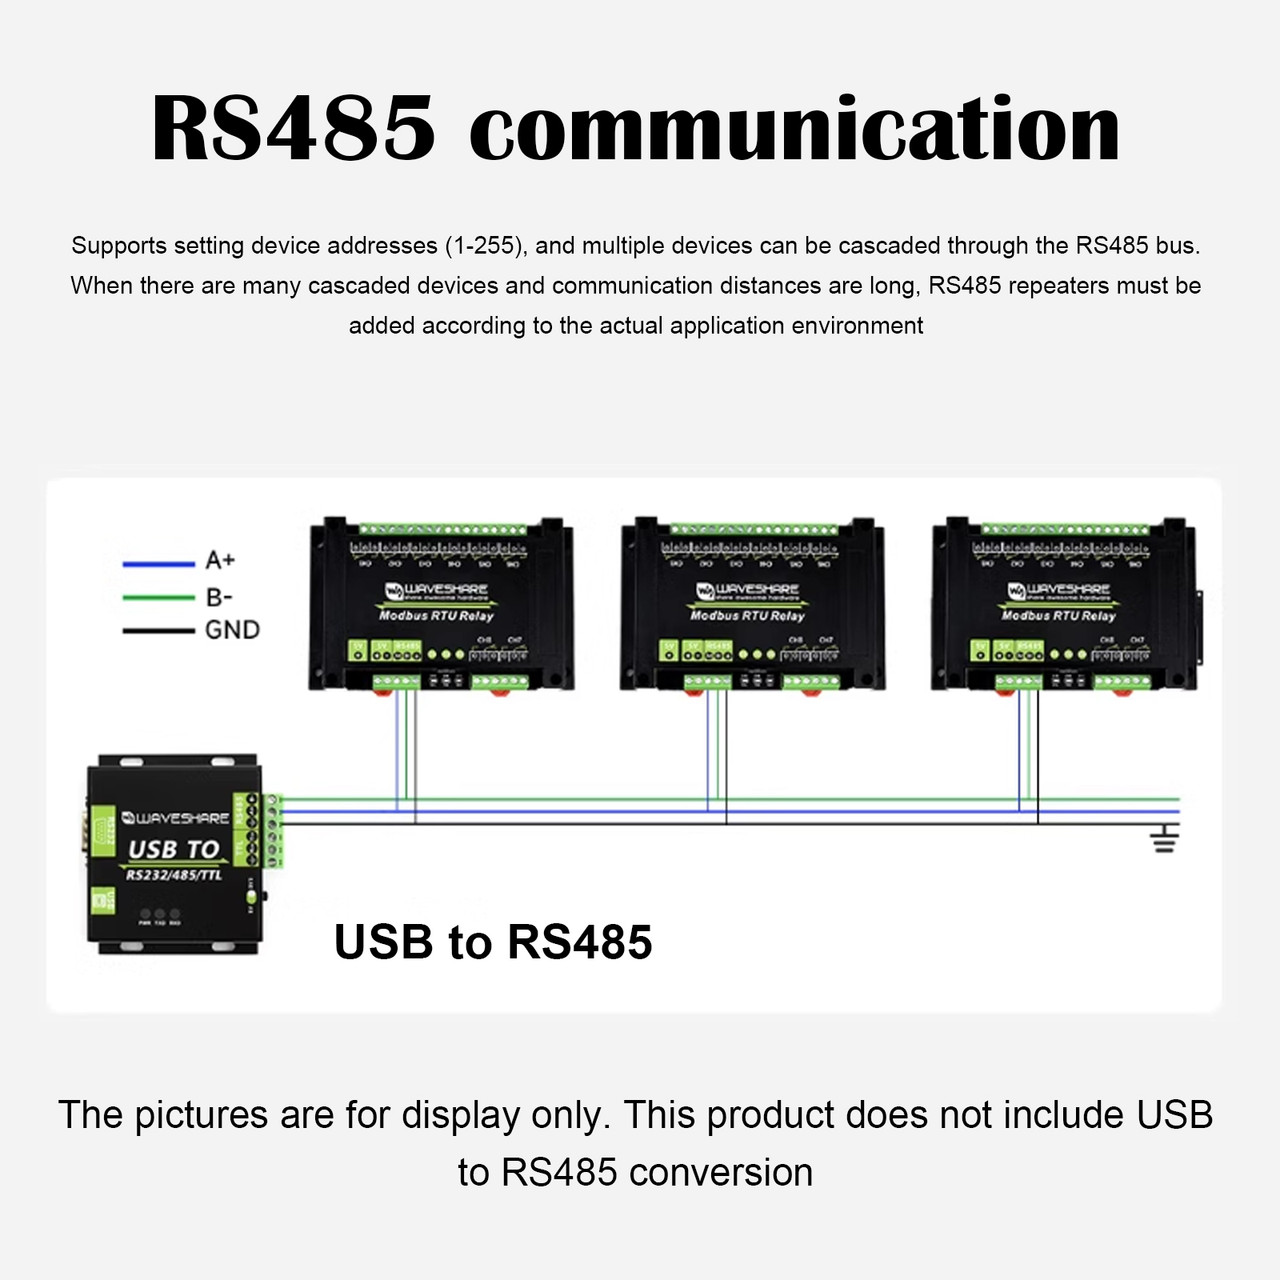 8-channel RS485 Relay Module Multiple Isolation Protection Circuits US Plug